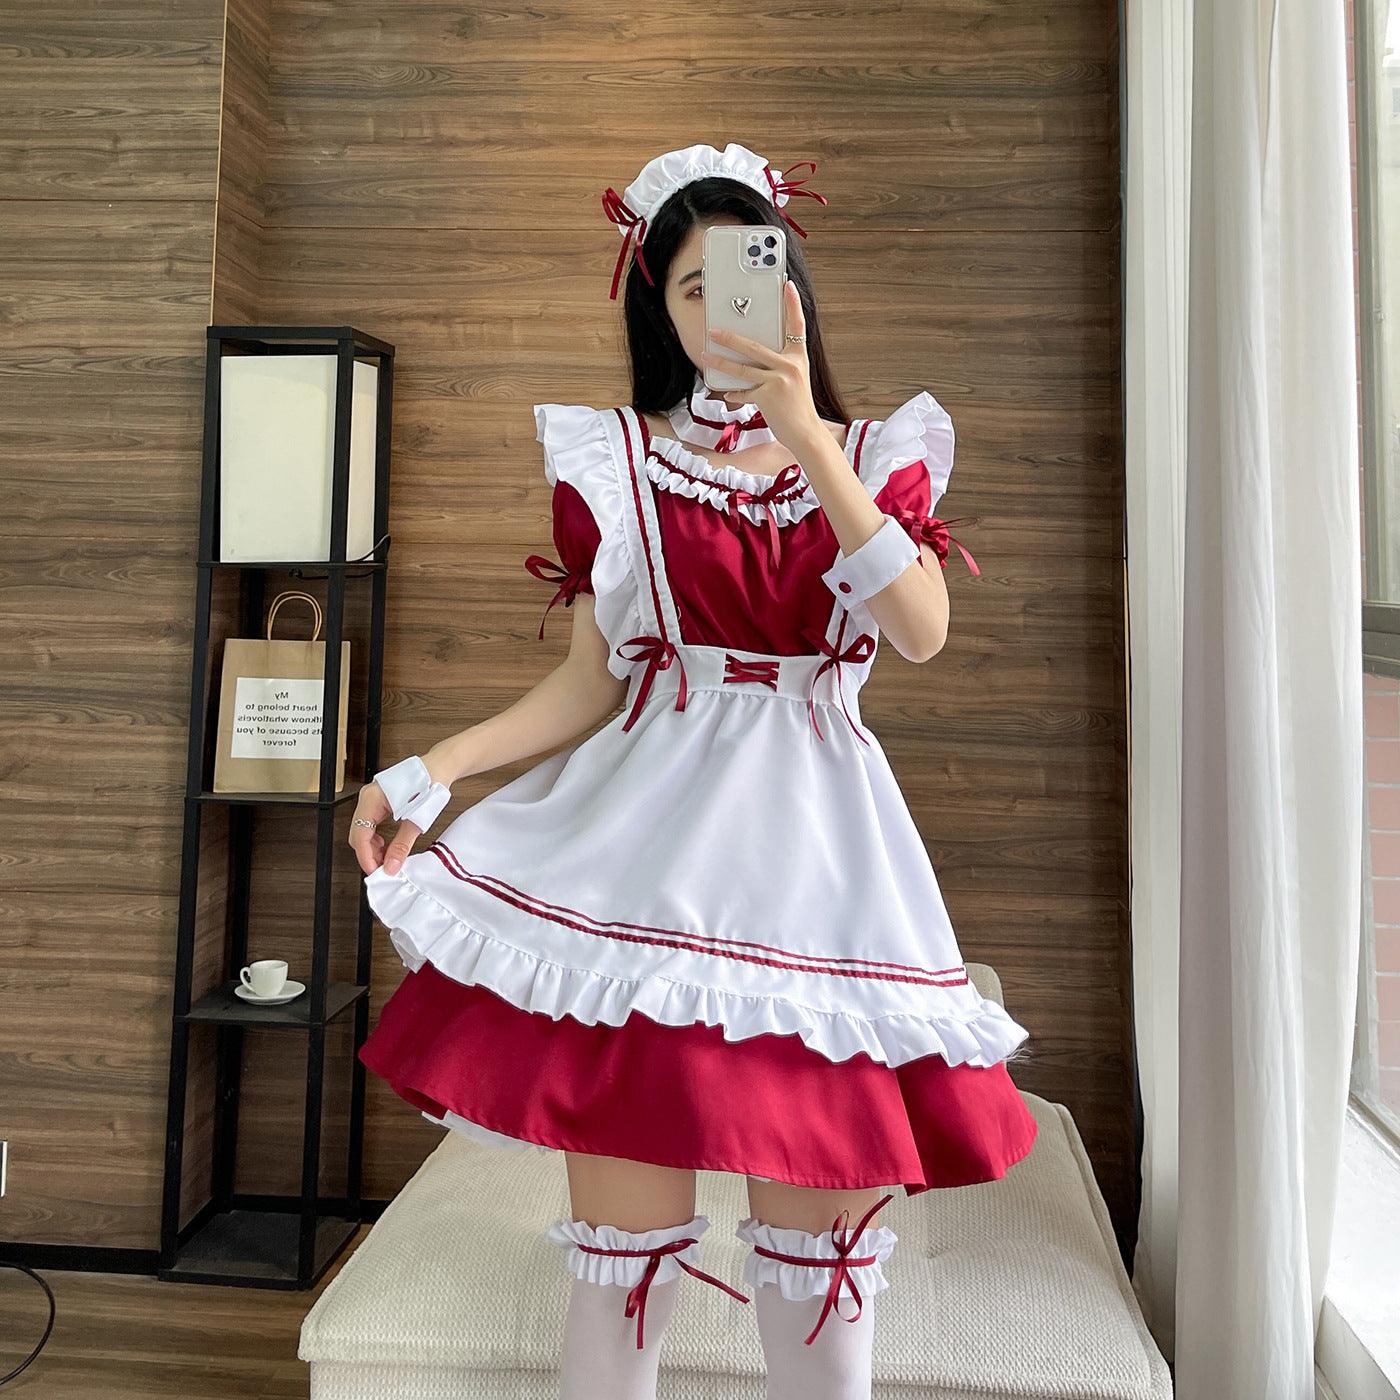 Miracle Nikki French Maid Outfit Suit Dress Anime Game Lolita Fancy Dress Cosplay Costume